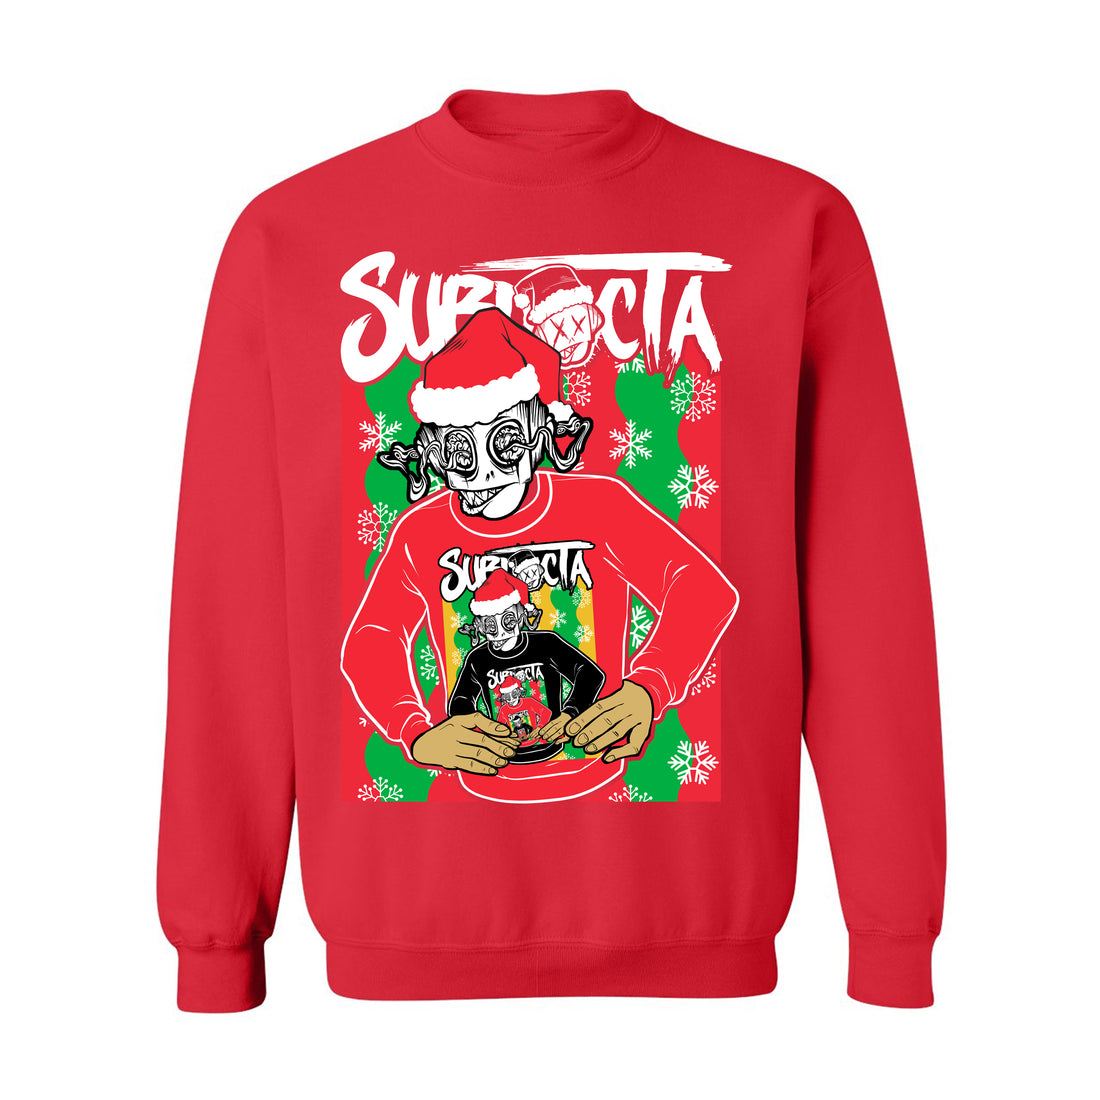 Subdocta - Holiday 2022 Sweater